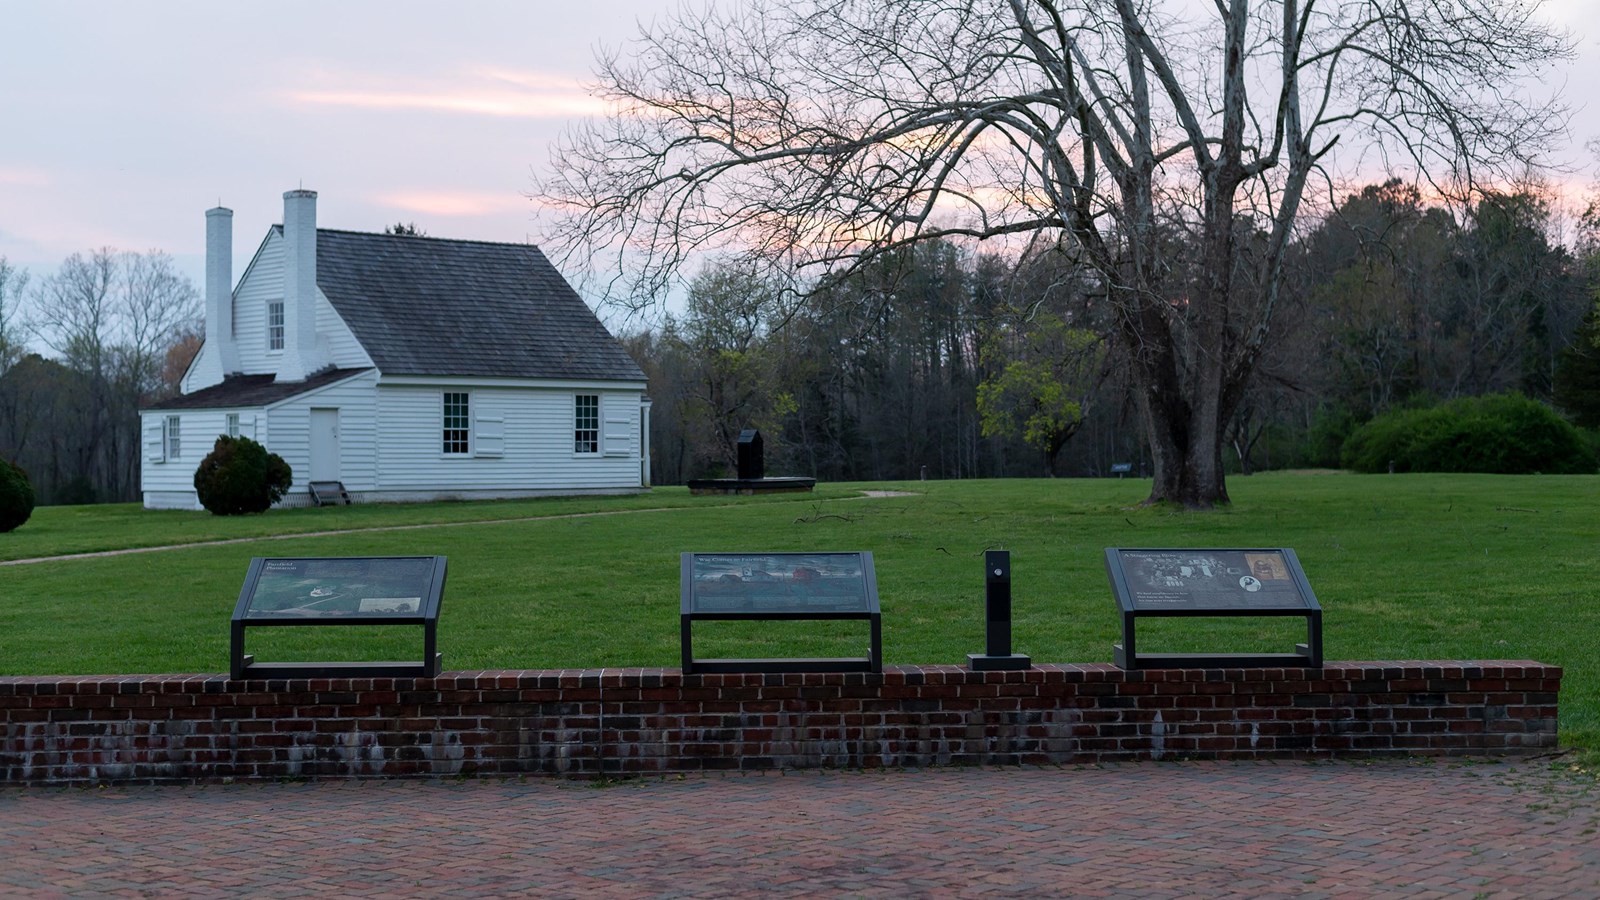 Three interpretive signs in front of a brick wall looking out to a field with a white house.